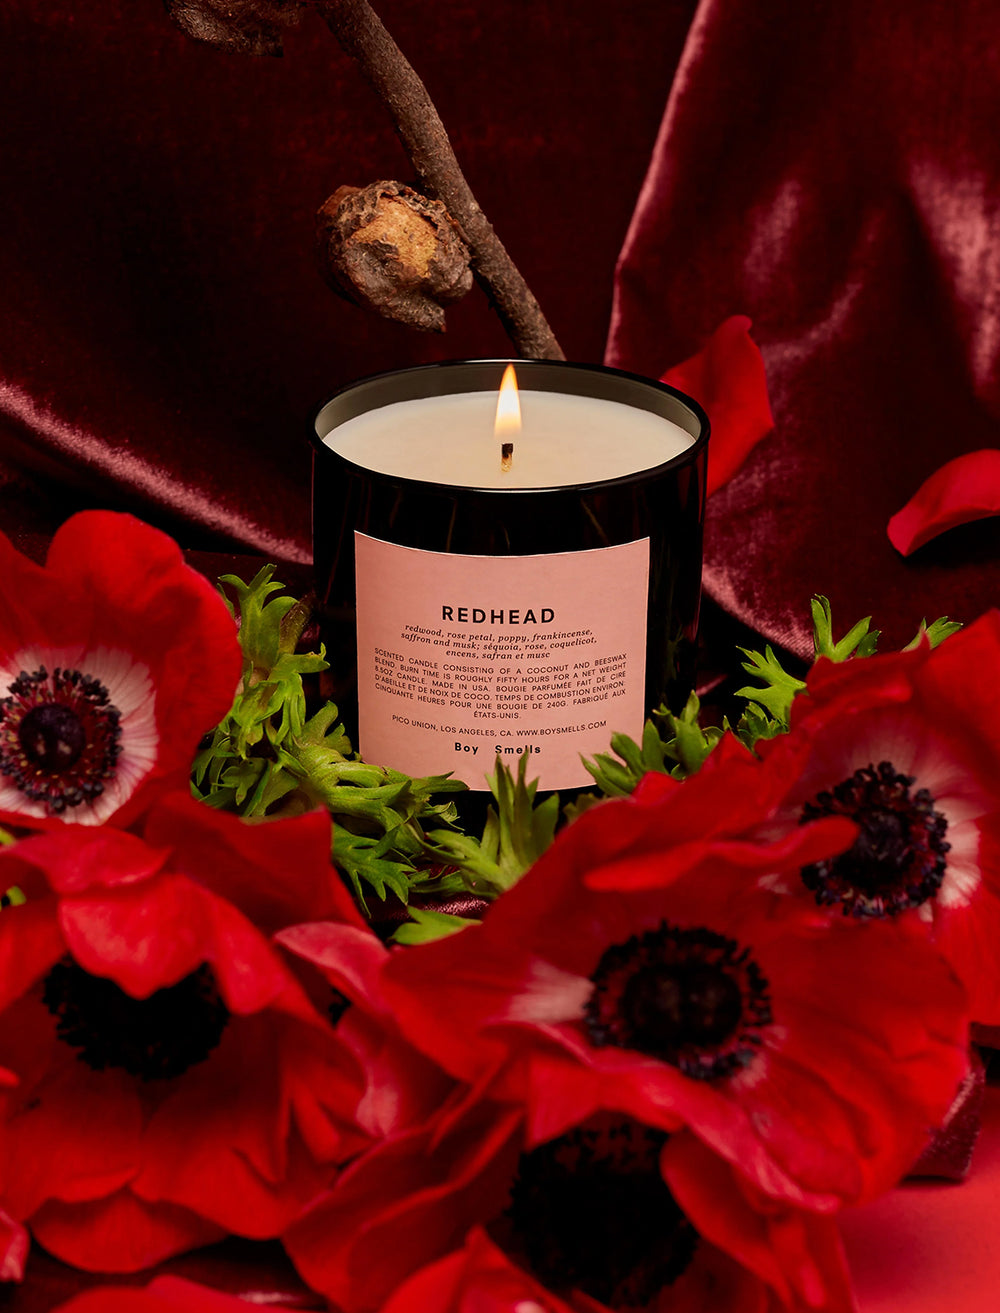 Campaign image of Boy Smells' Redhead candle.